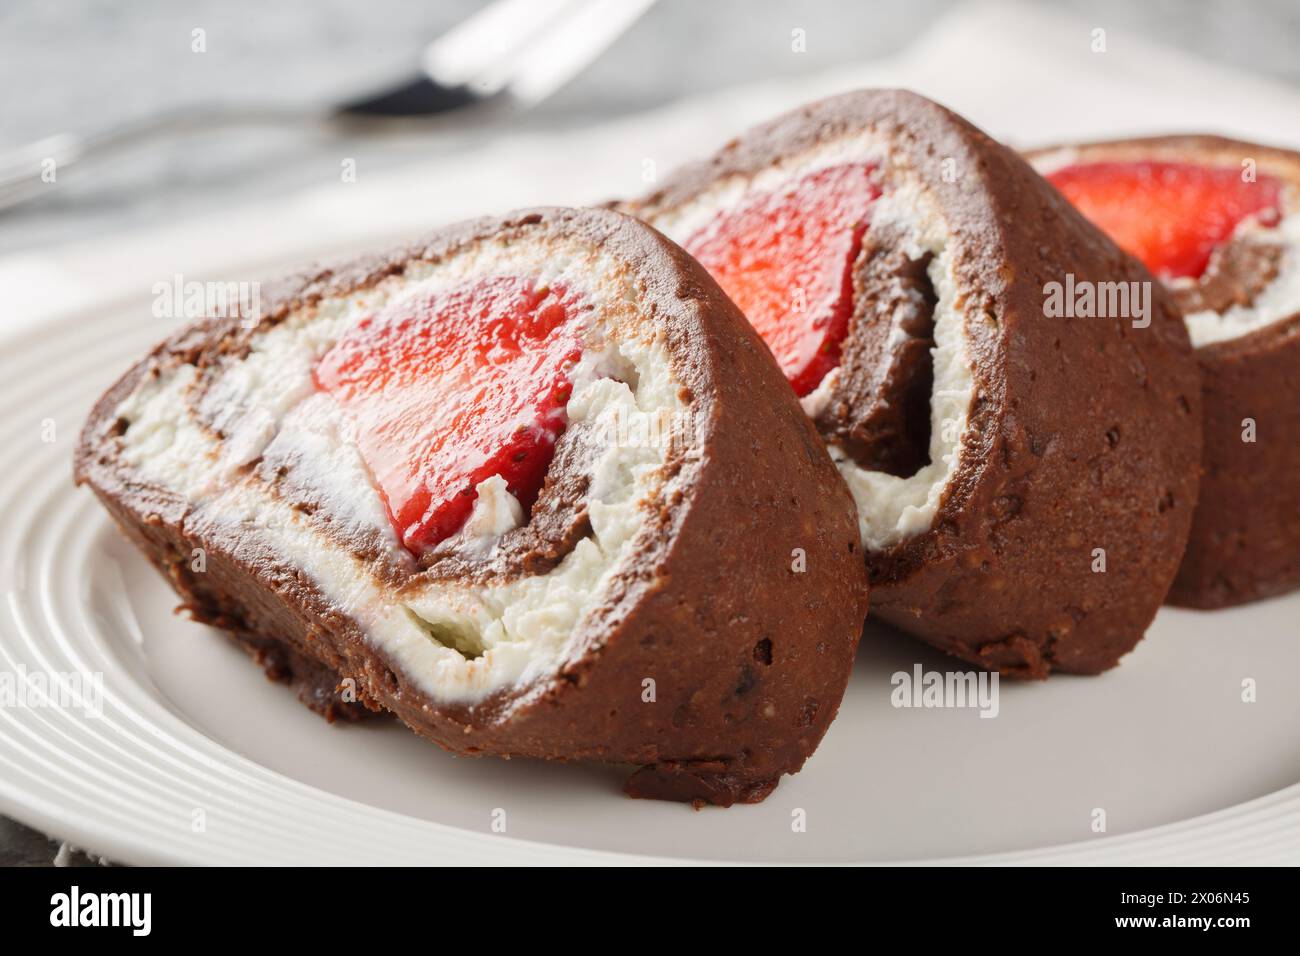 Pieces of chocolate cake roll with strawberries and cream cheese close-up on a plate. Horizontal Stock Photo